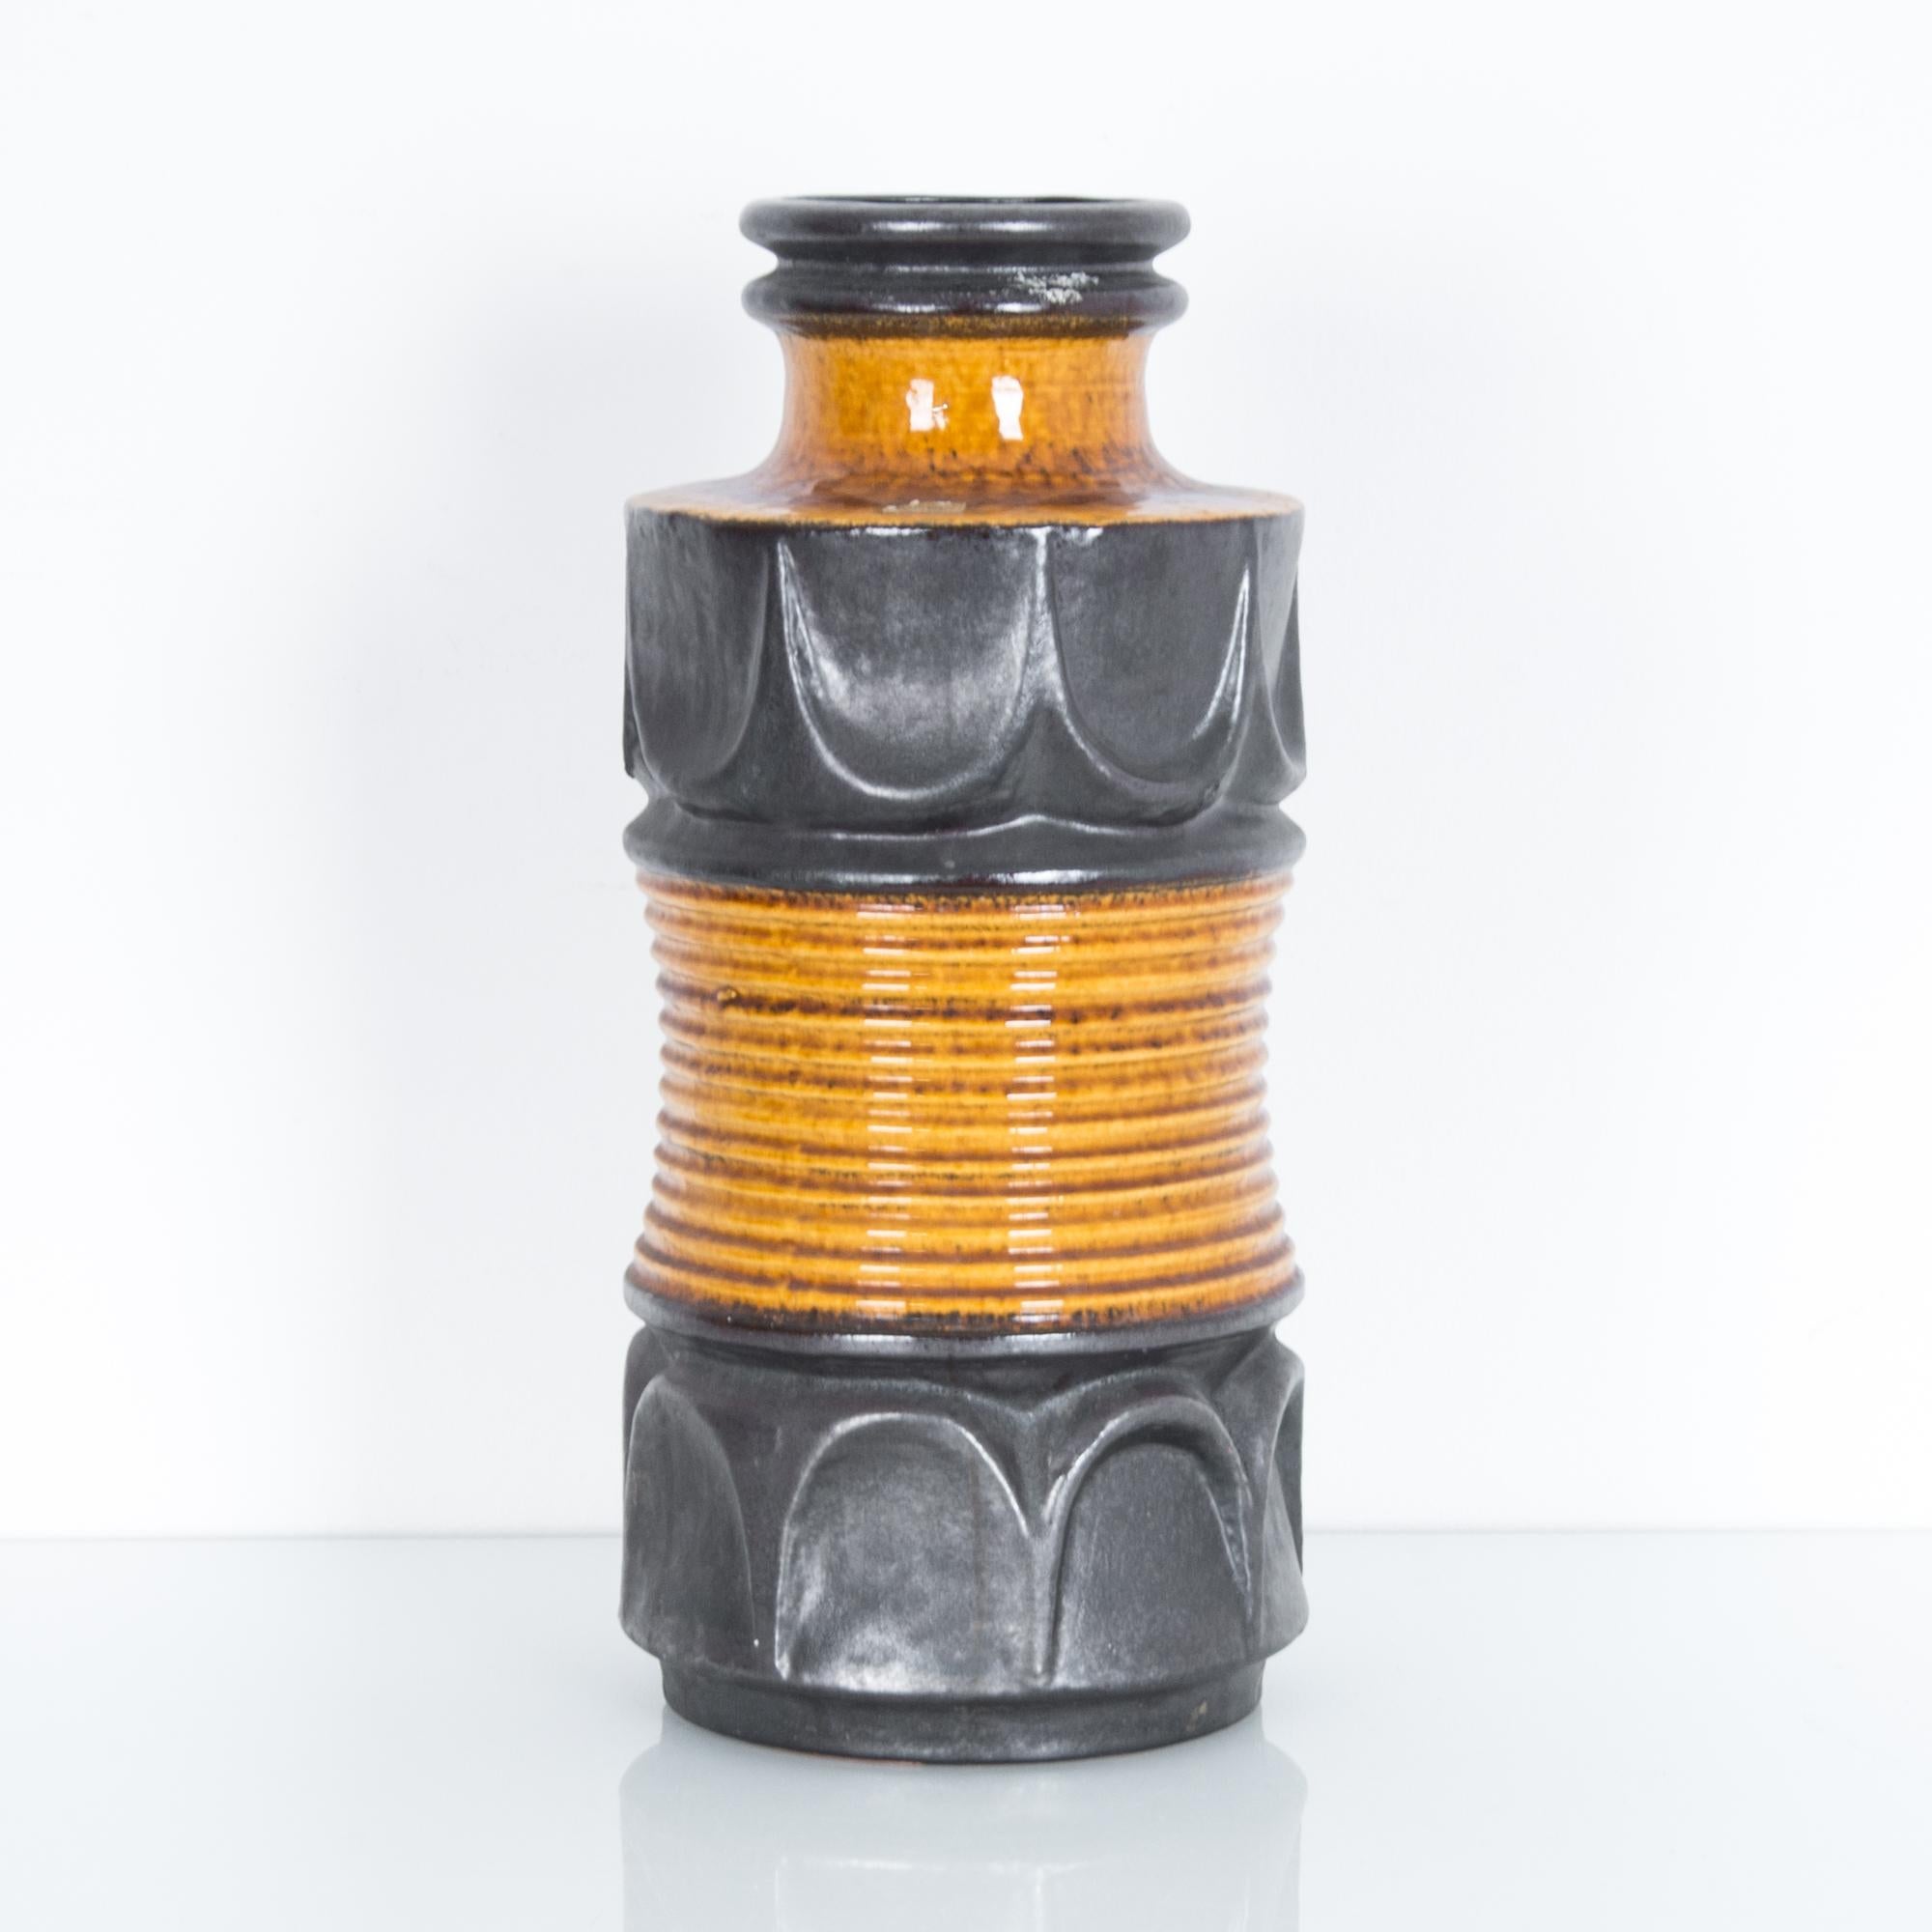 A graphic patterned vase from Germany circa 1960, glazed in metallic grey and orange. These characteristic mid-20th century ceramics were produced in West Germany, featuring “W. Germany